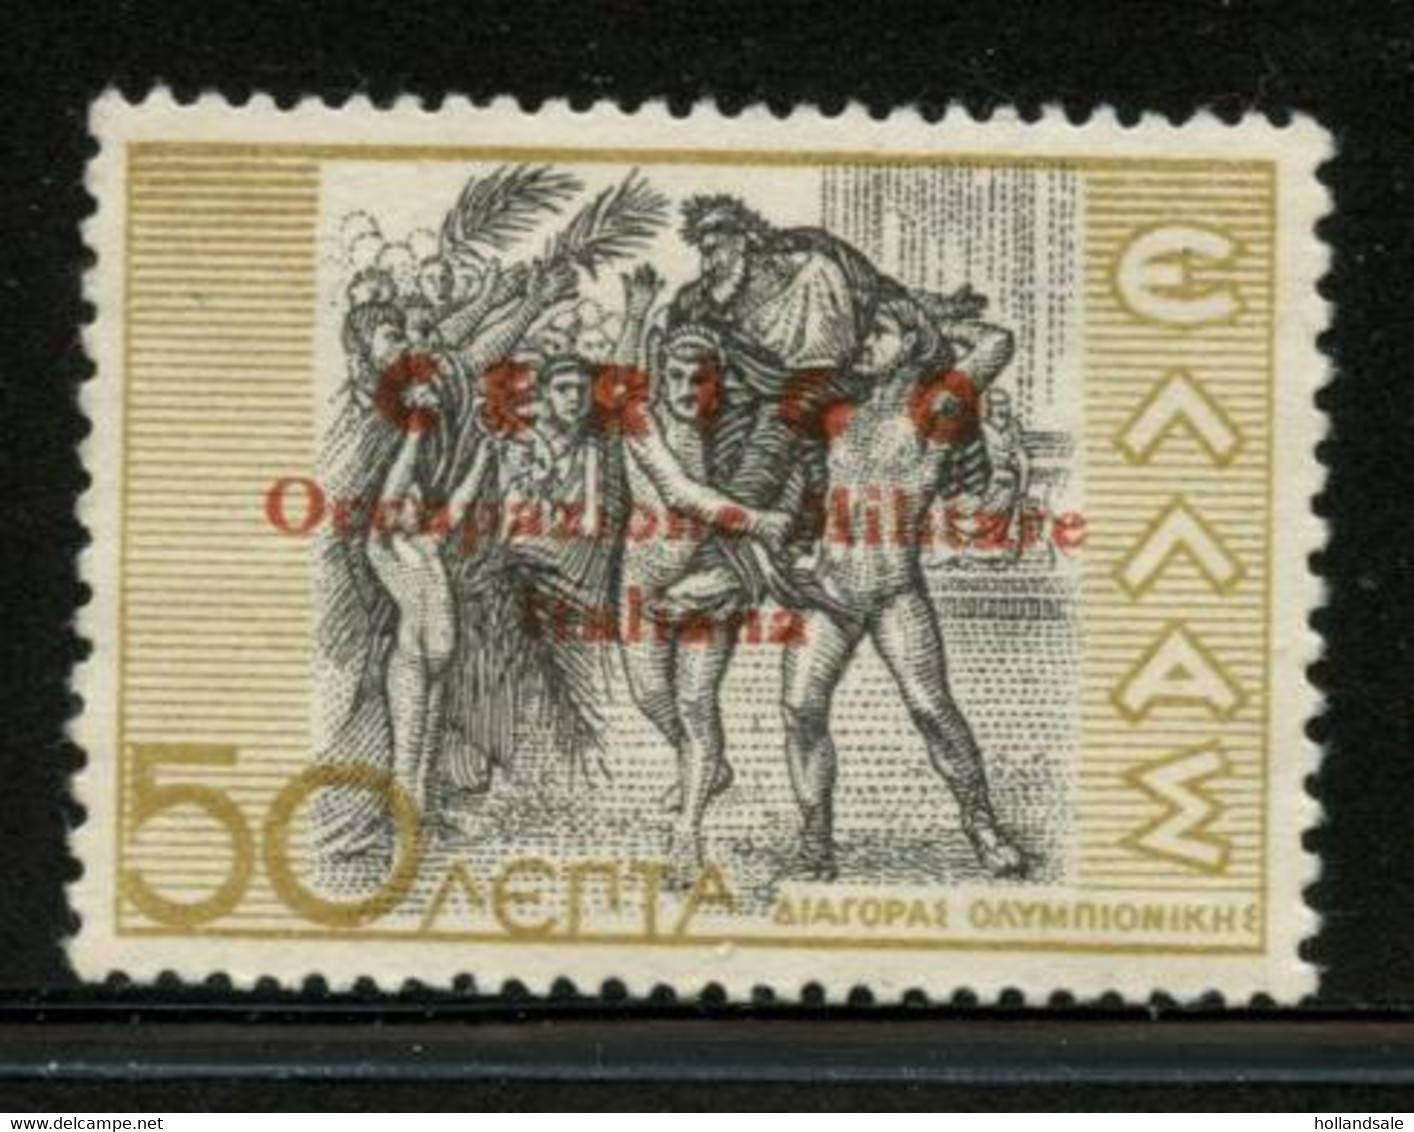 GREECE / CERIGO ITALIEN OCCUPATION - Unused Stamp Of Greece With Opt.  ISOLE JONI. - Local Post Stamps